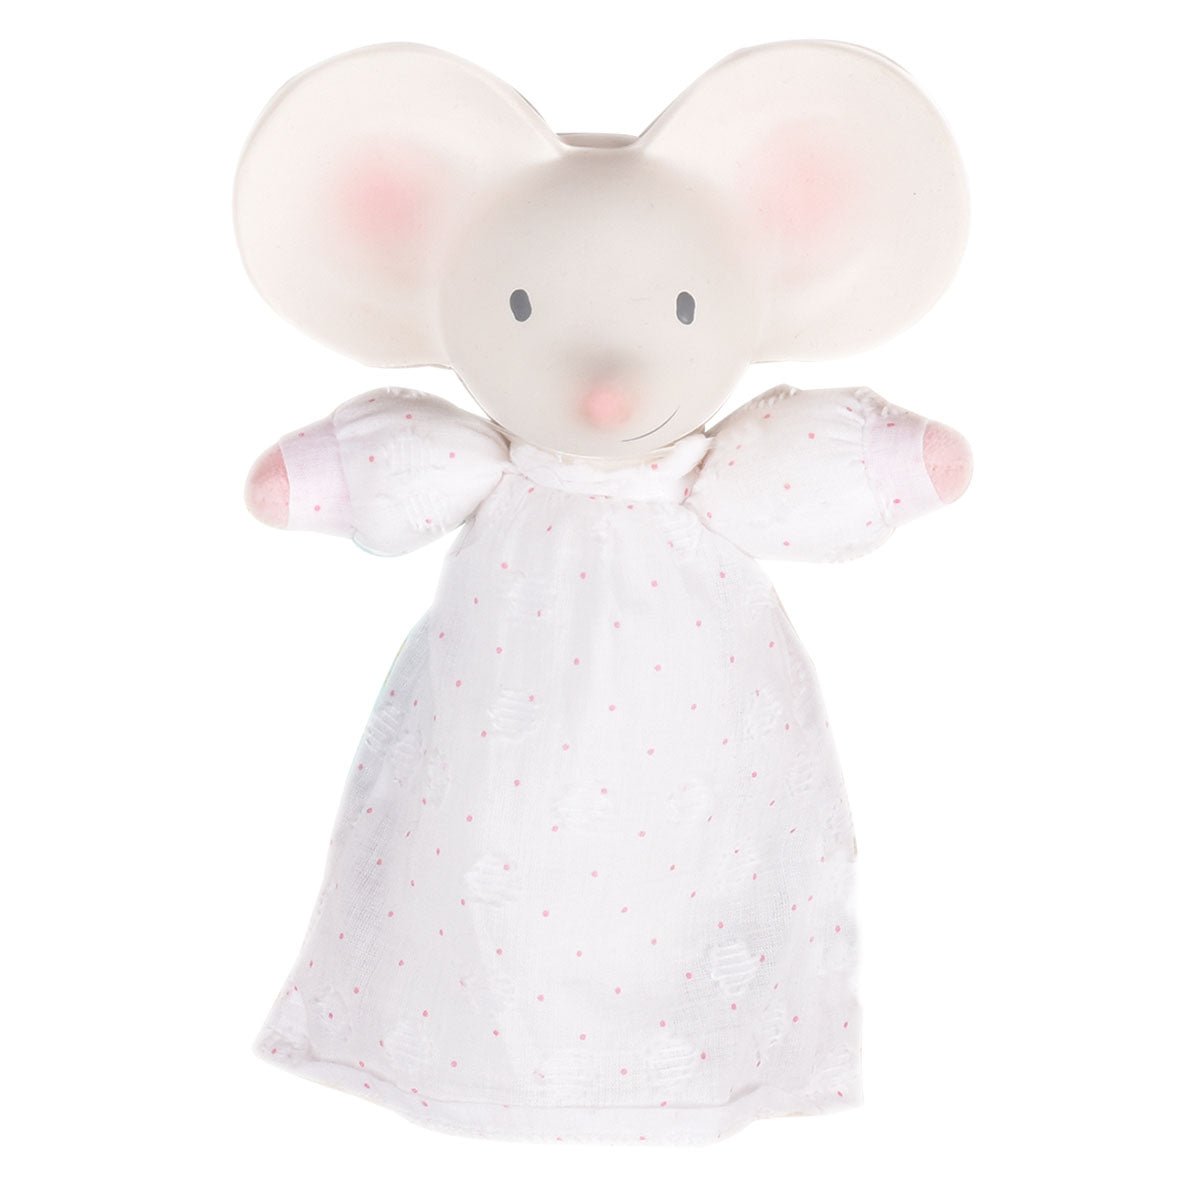 Meiya The Mouse Soft Squeaker & Teether With Organic Natural Rubber Head